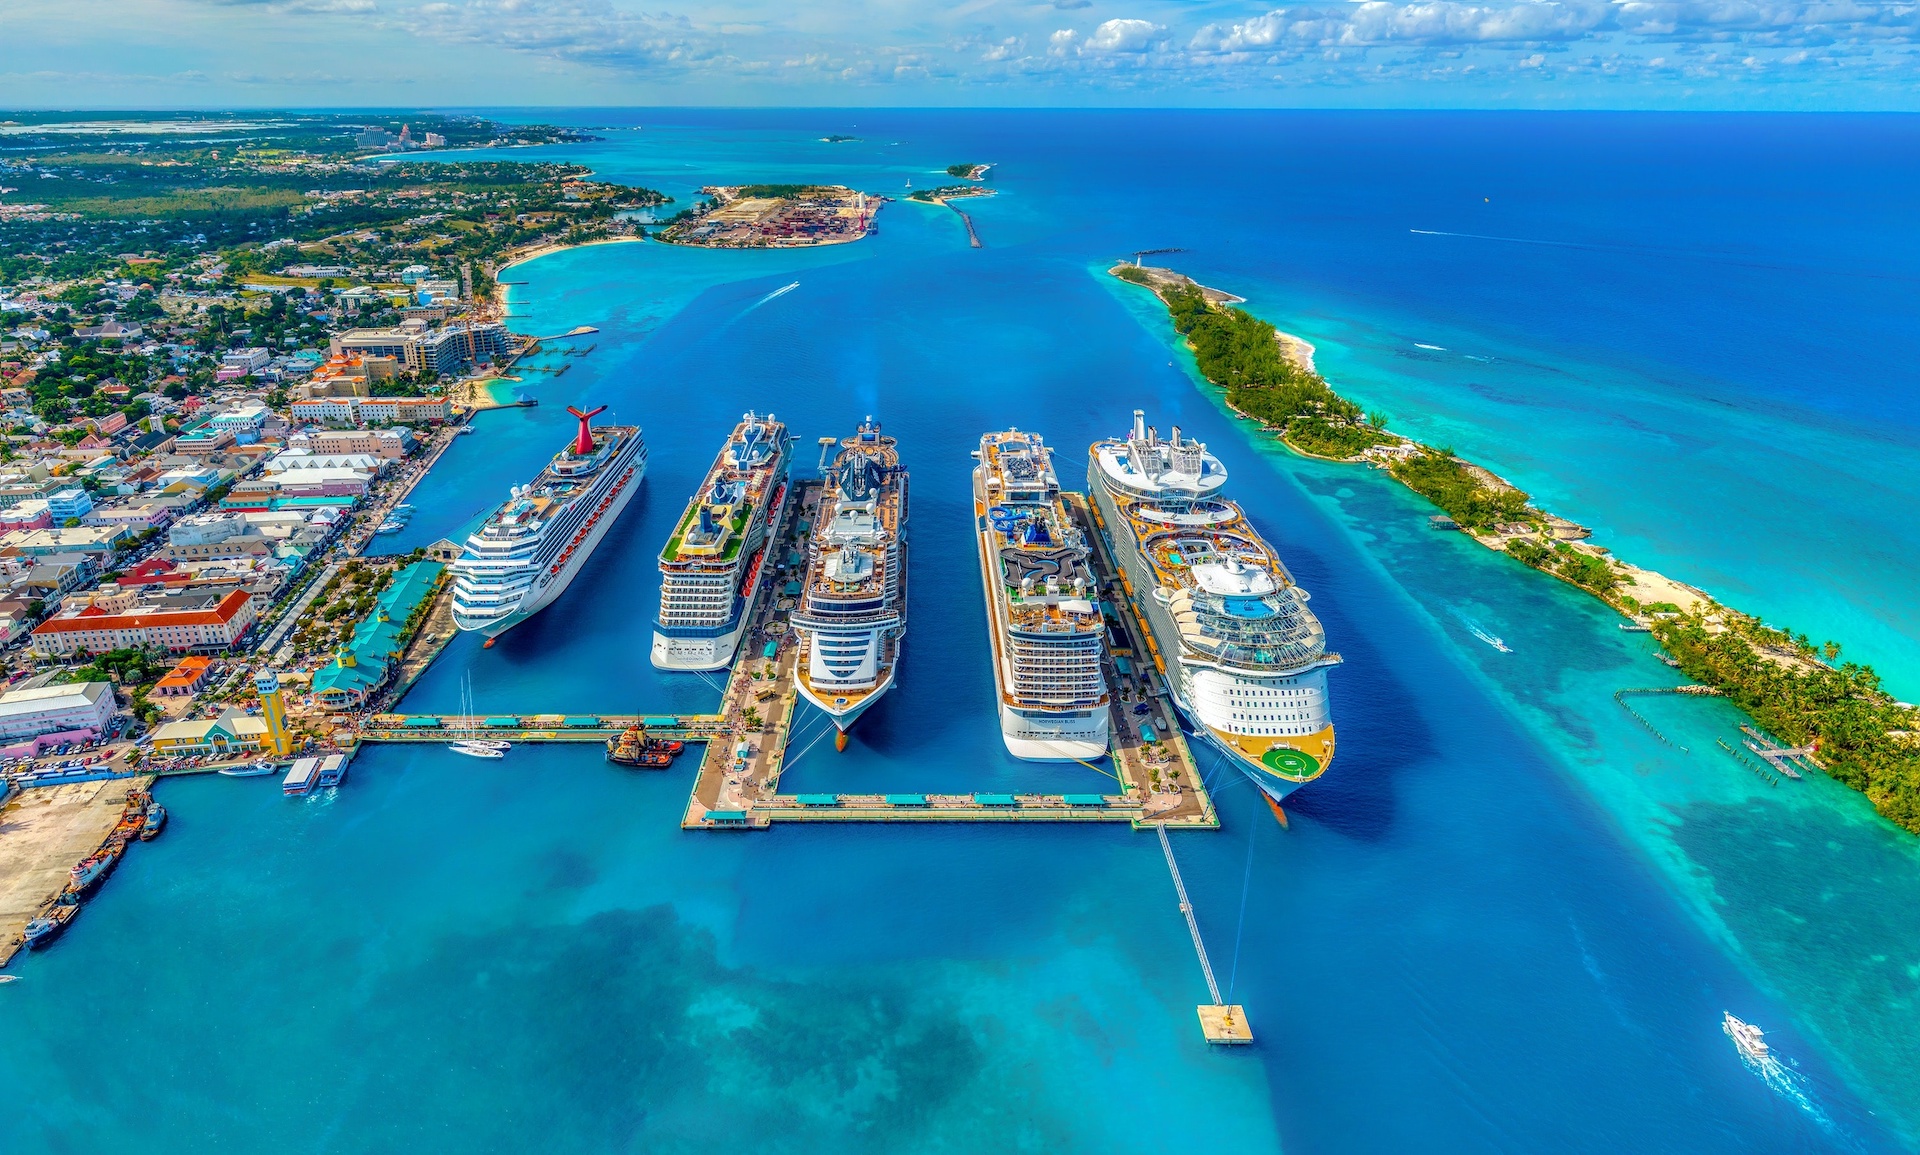 Image description: Five large cruise ships docked in a deep water port beside the blue expanse of the ocean and a port-side town. End of alt text.